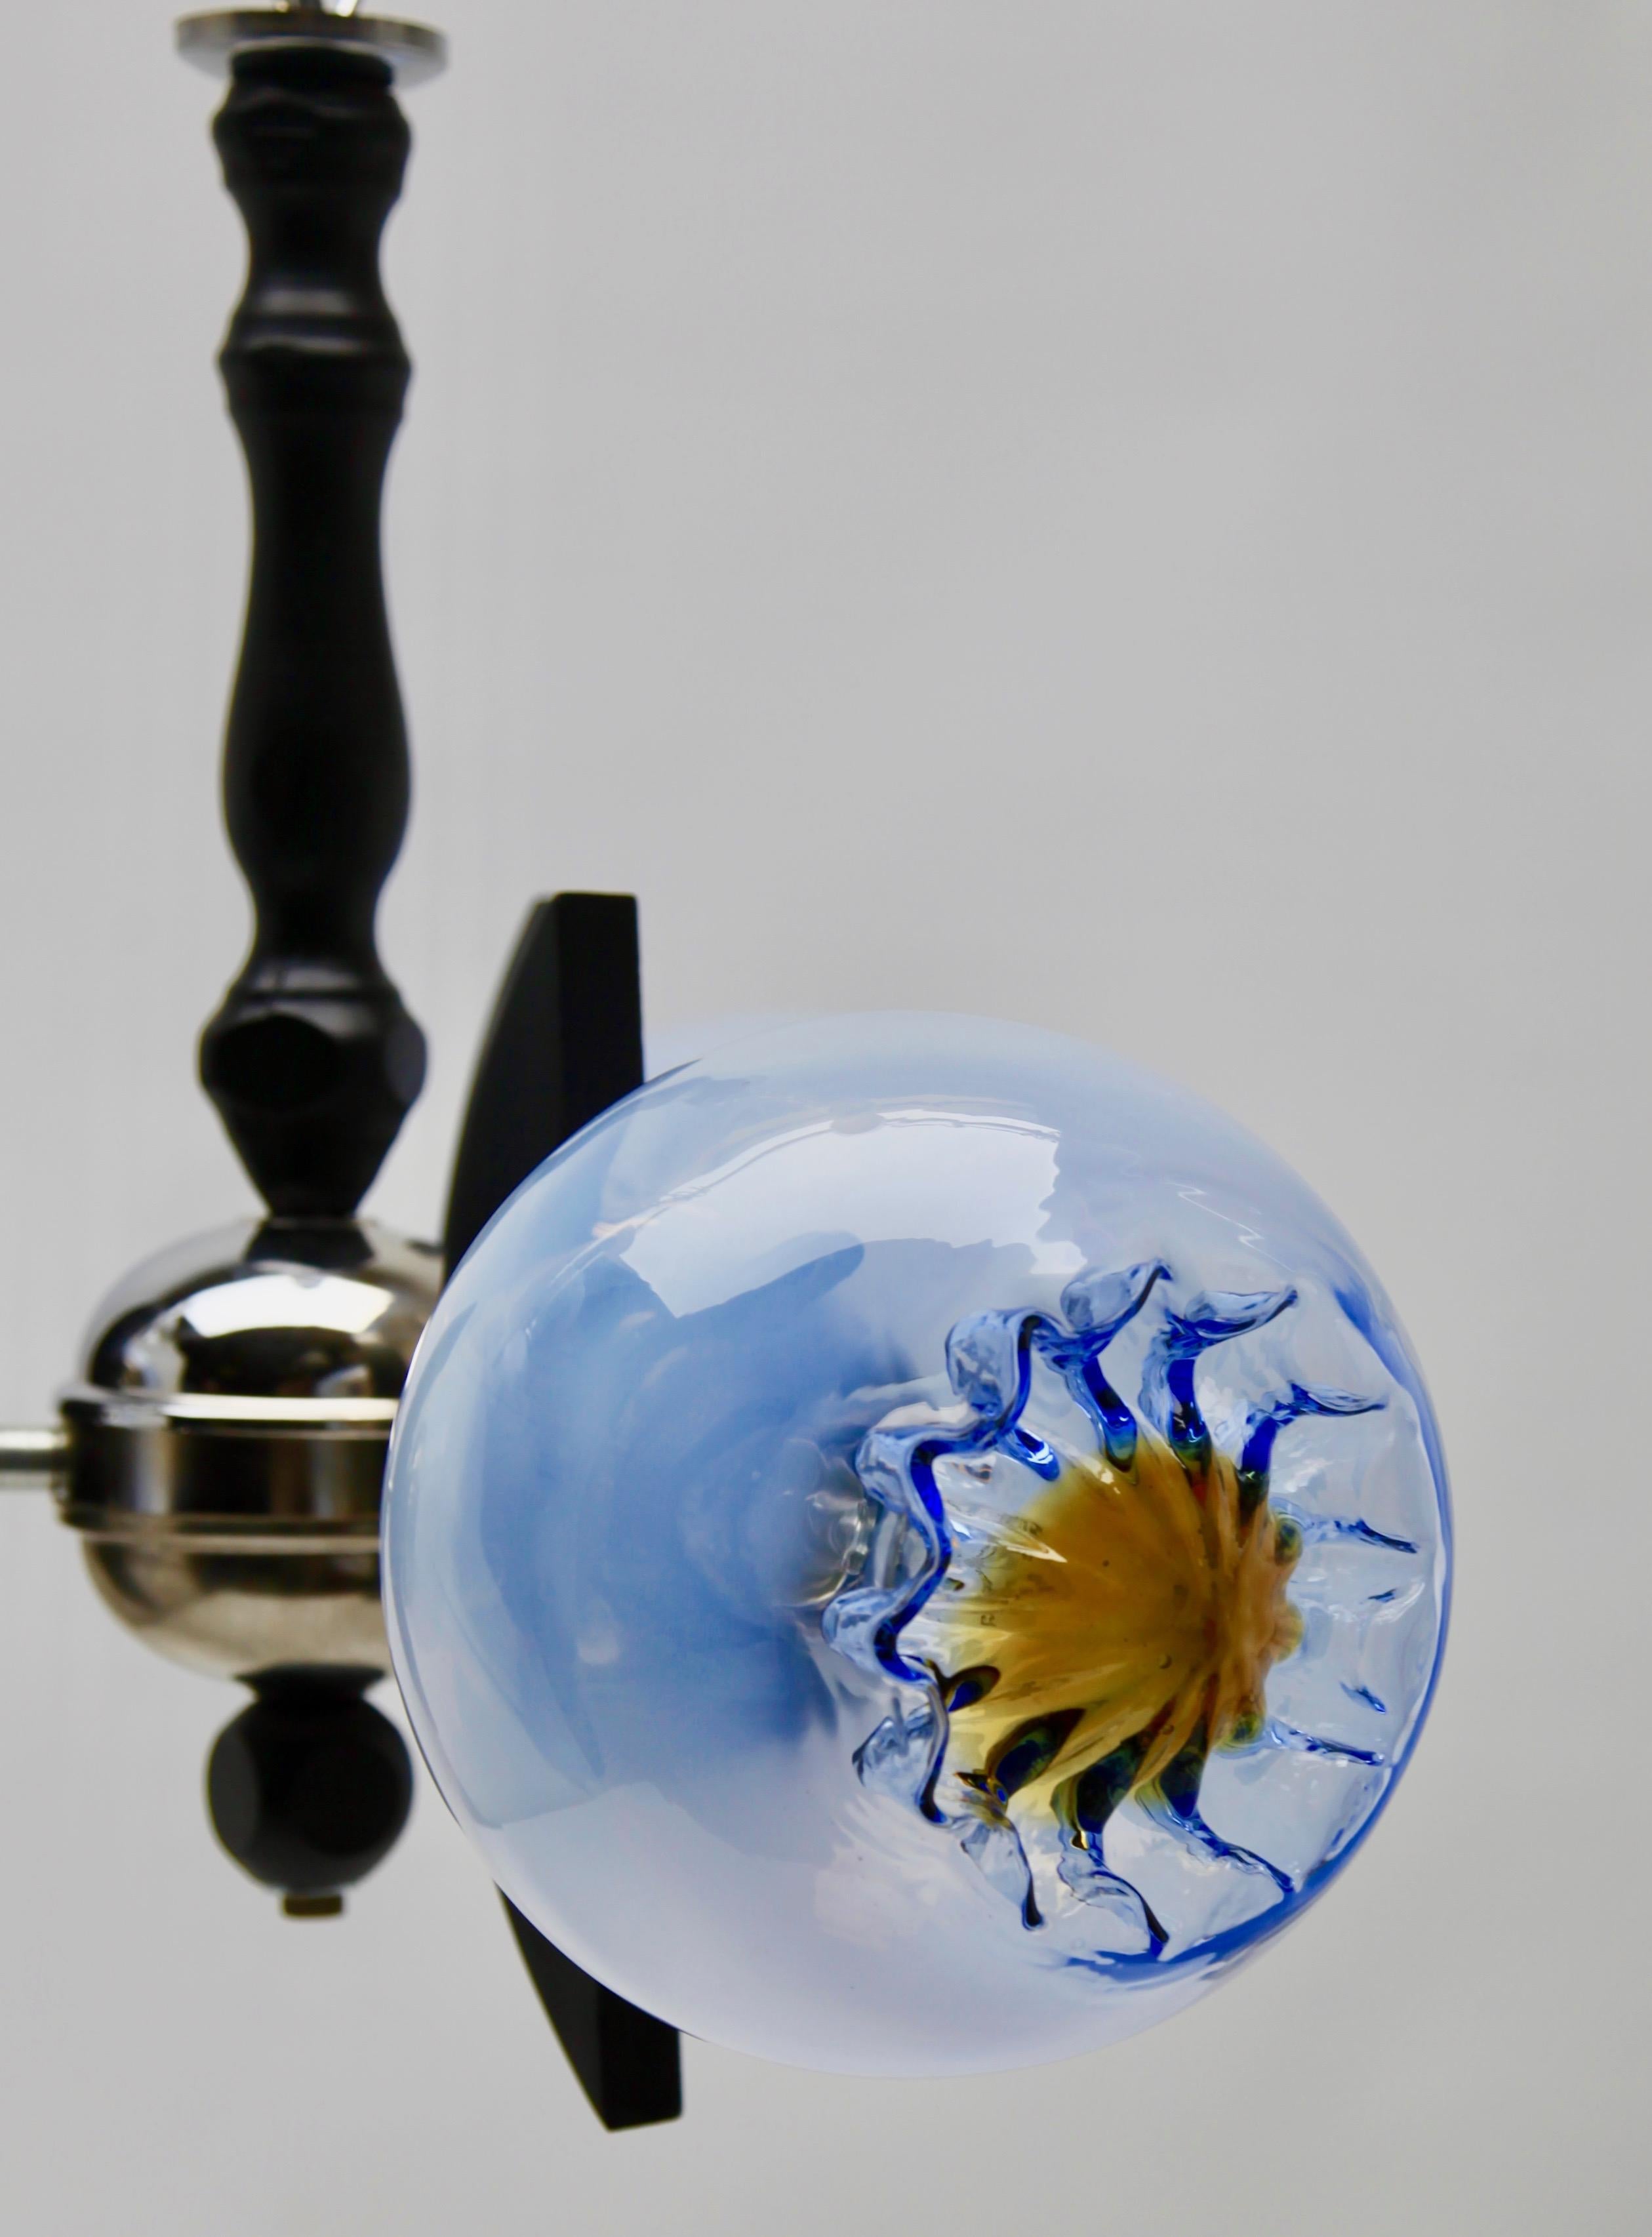 Pendant by Mazzega with 3 Globes of Clear Glass with Orange and Bleu Inclusions For Sale 4